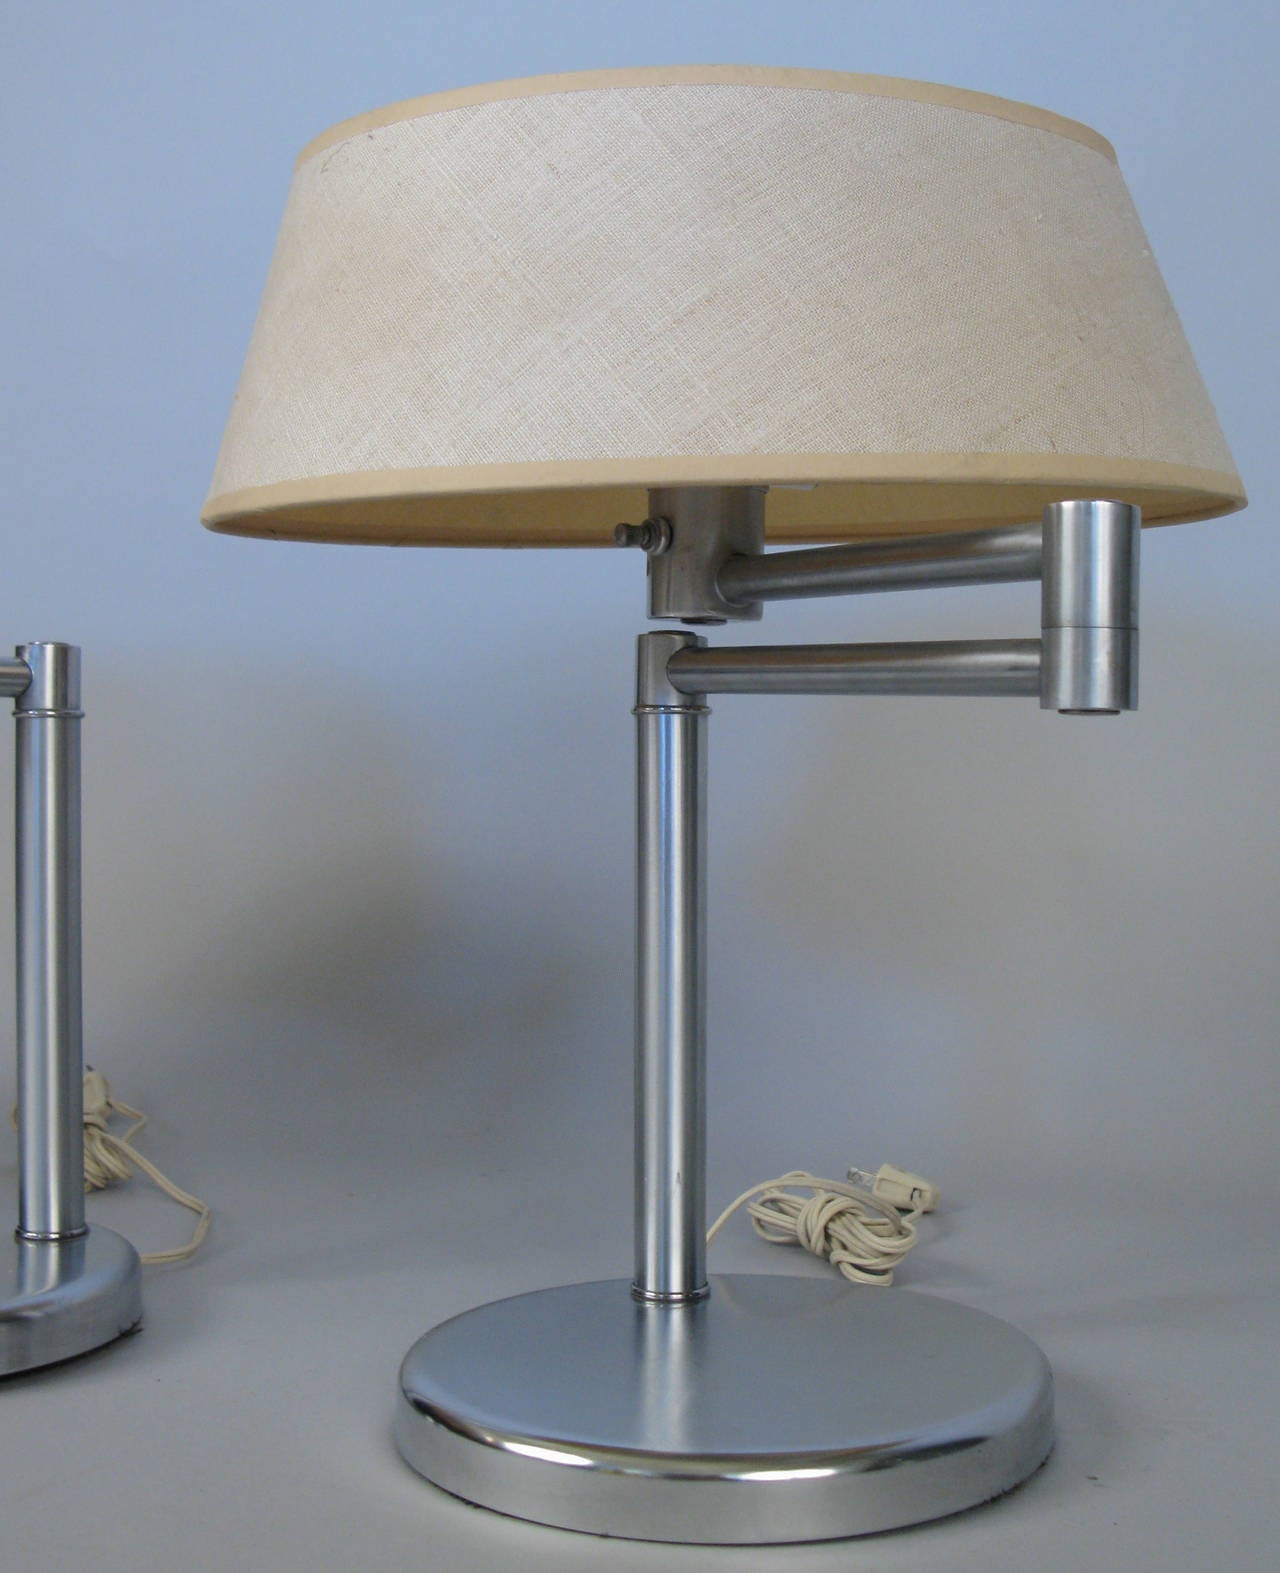 A matched pair of Classic vintage modern 1960s swing arm lamps in brushed steel with their original shades and diffusers. Each lamp has a double socket and they are both in very good condition. Stamped Nessen.